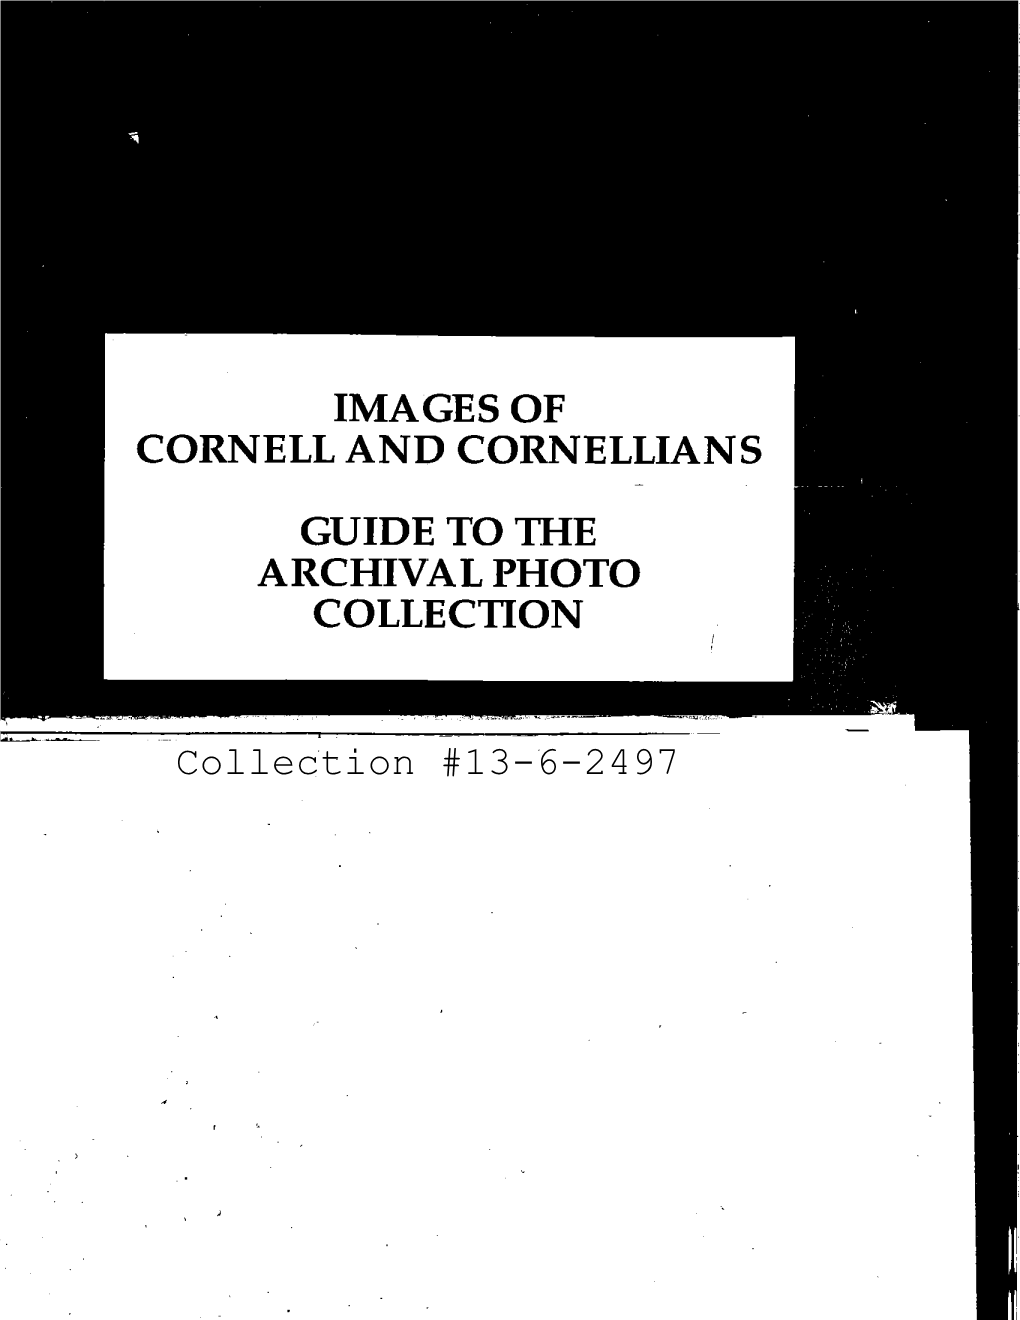 Images of Cornell and Cornellians Guide to The